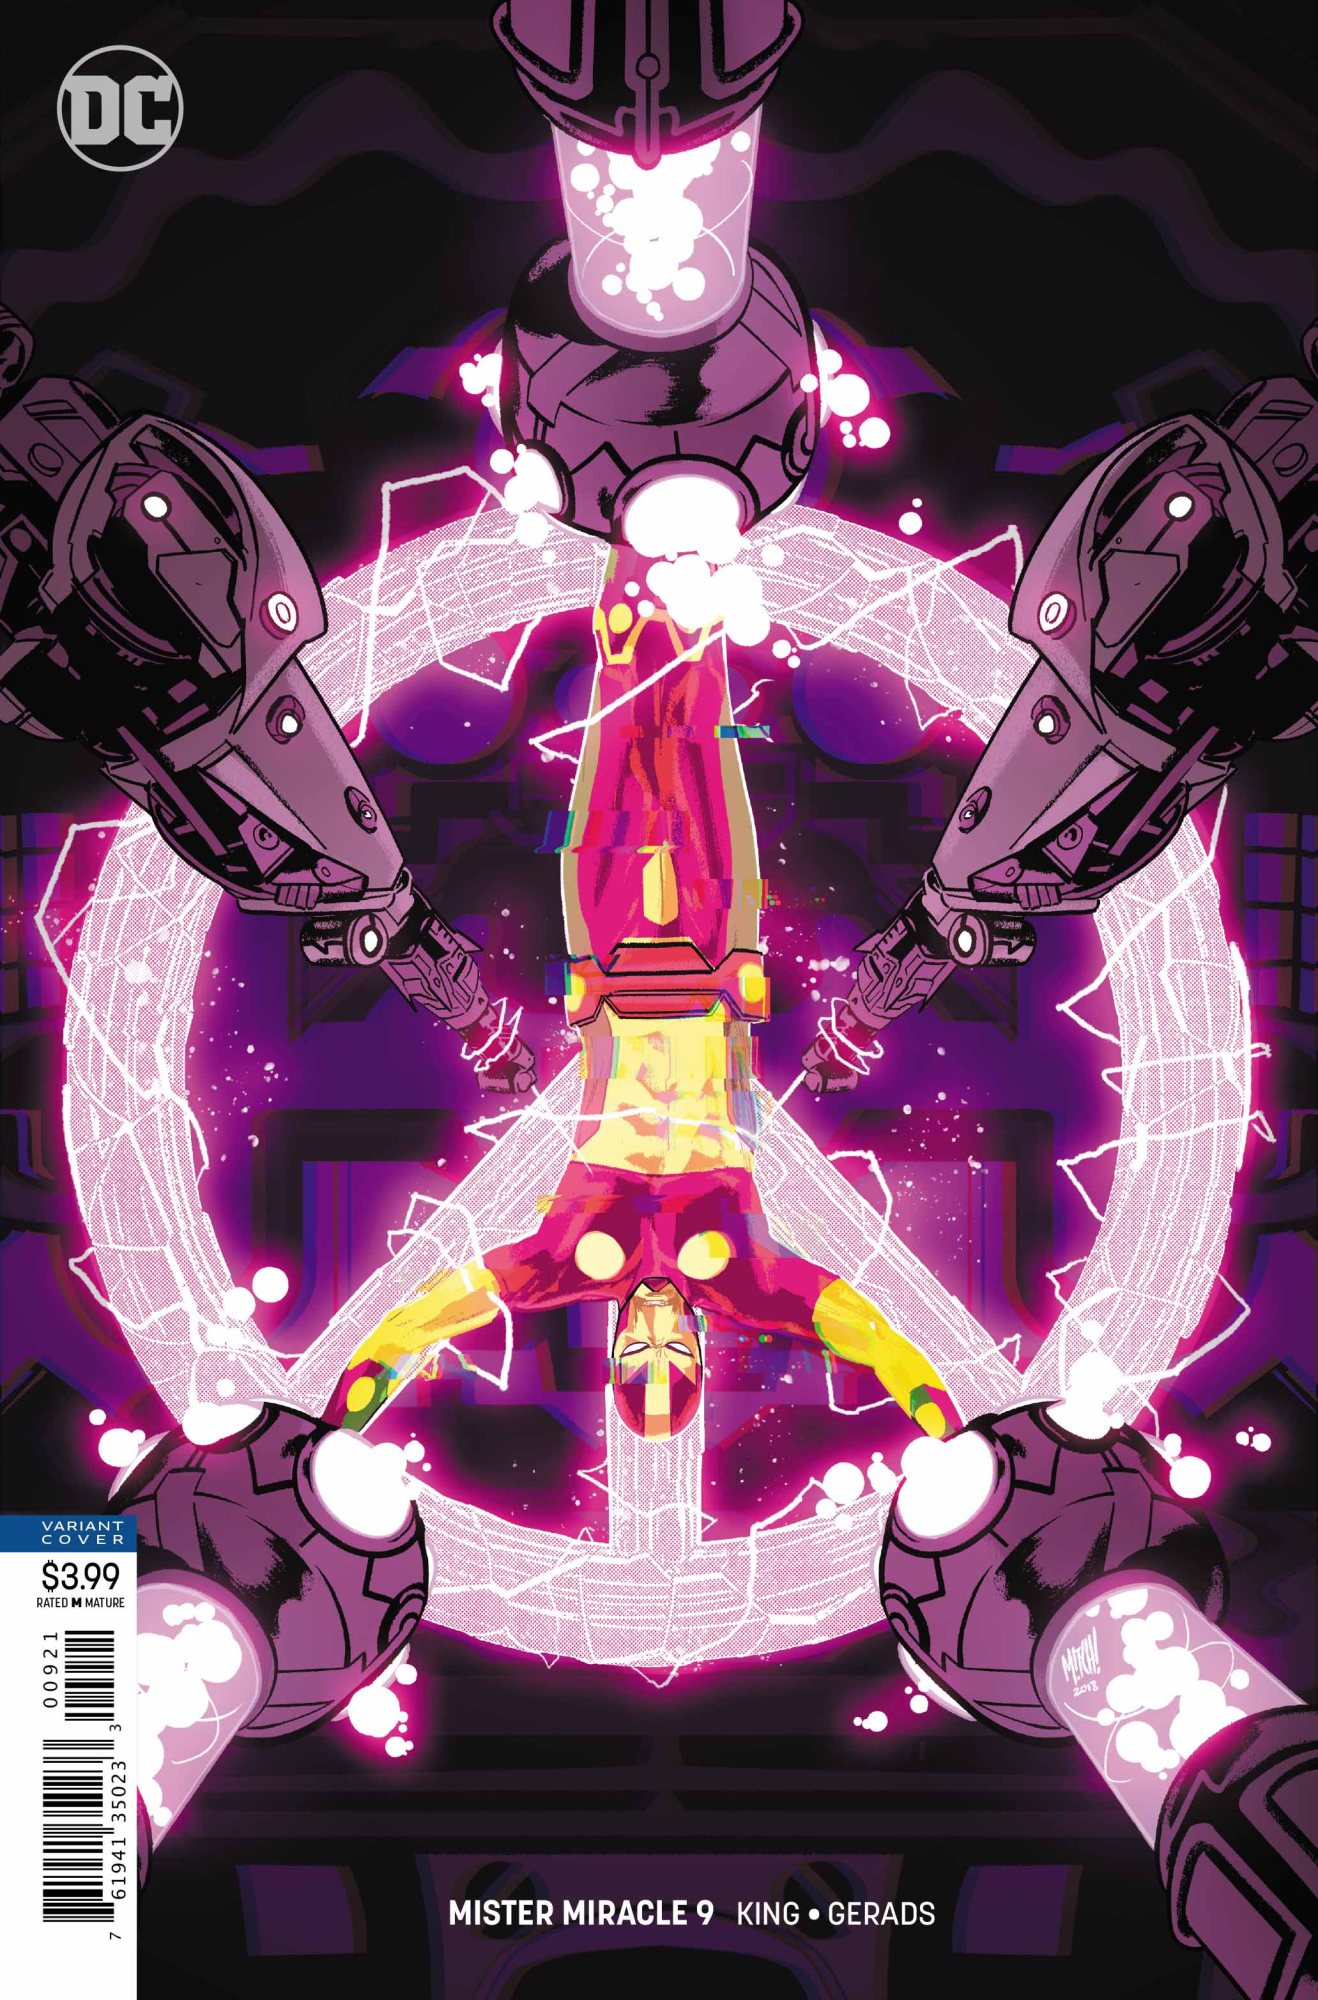 Mister Miracle #9 Review